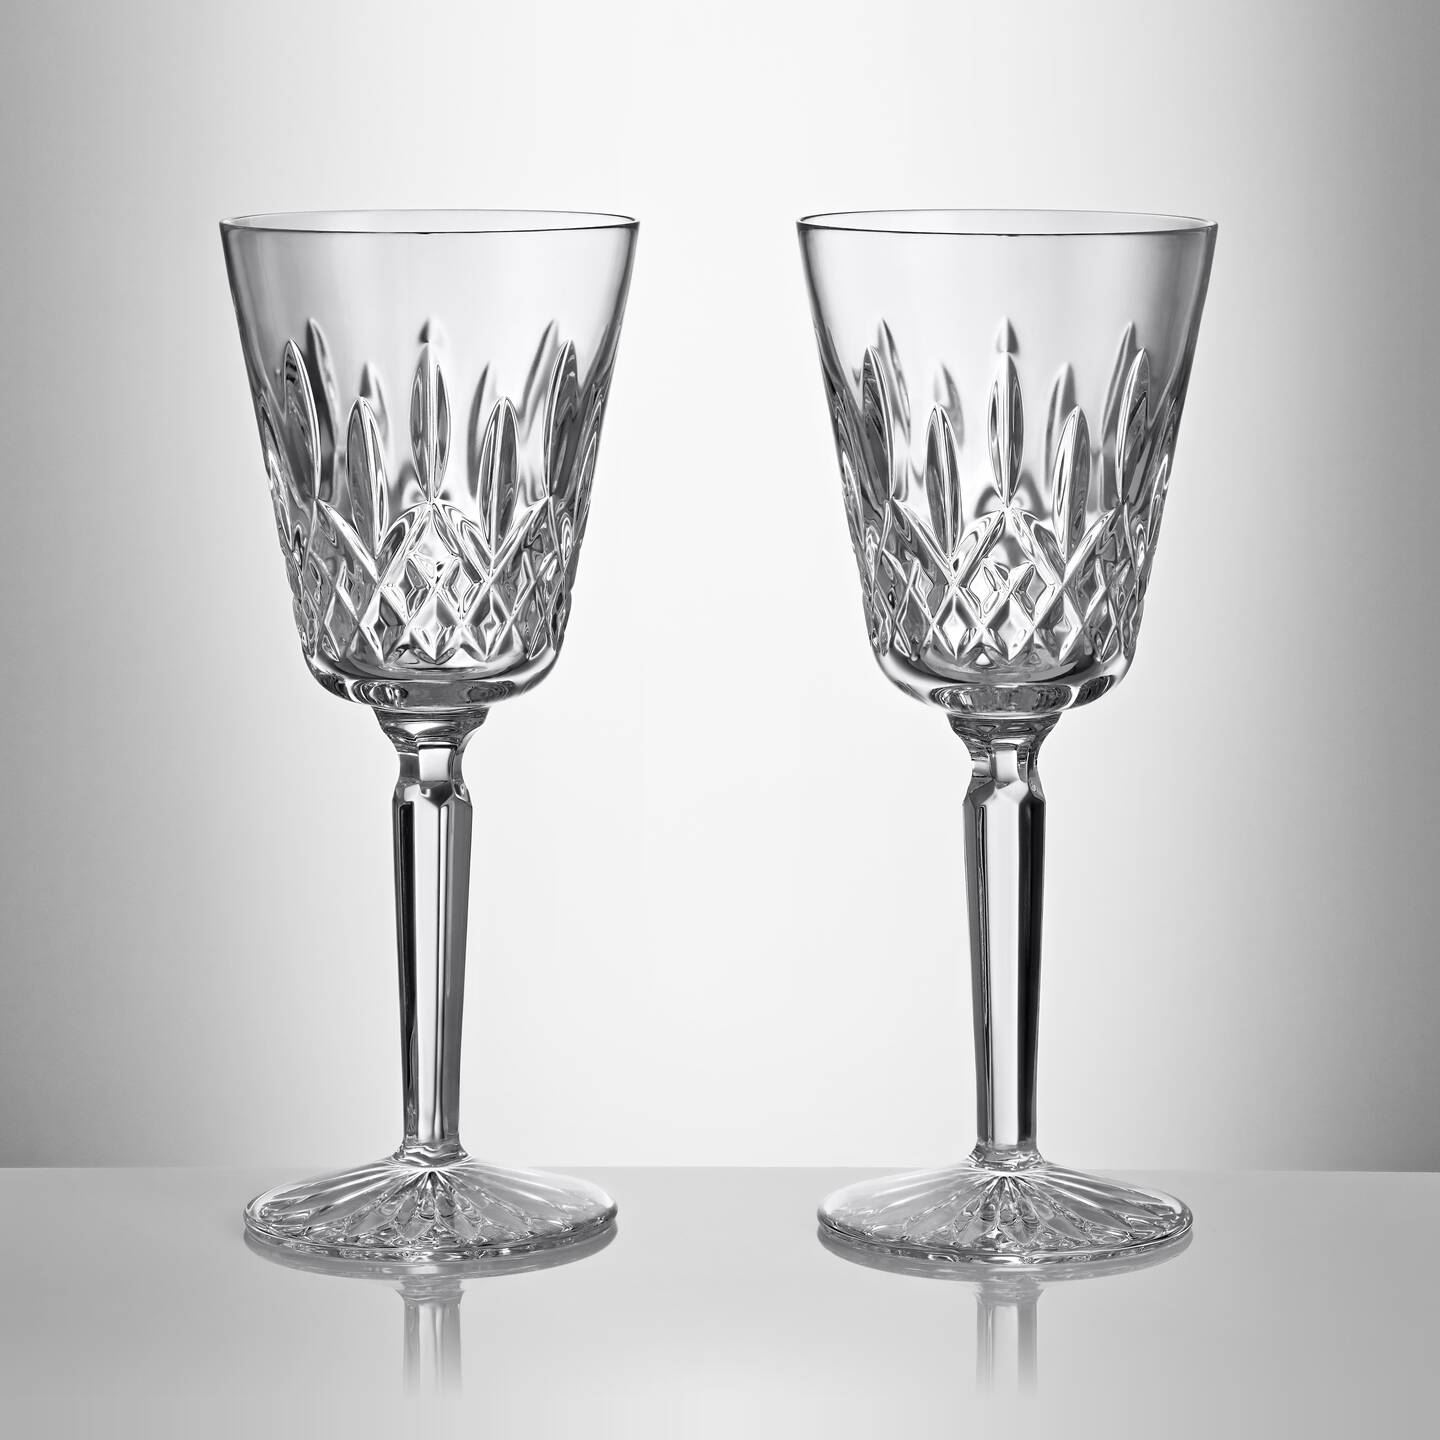 Lismore tall water glasses by Waterford (5)